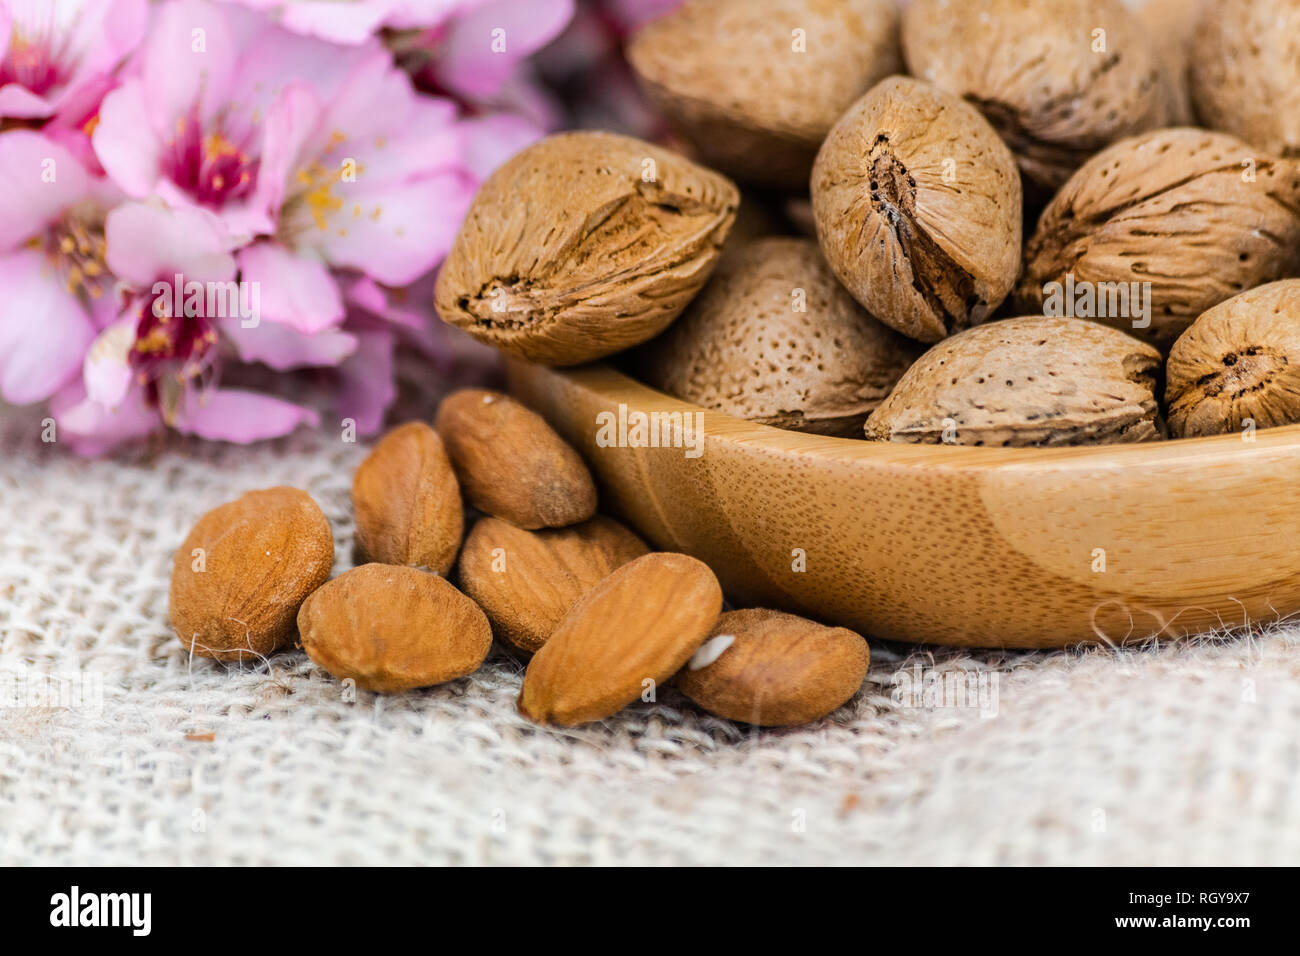 Almonds with shell in wooden bowl, almonds spilled on sack surface, with almond flowers background Stock Photo